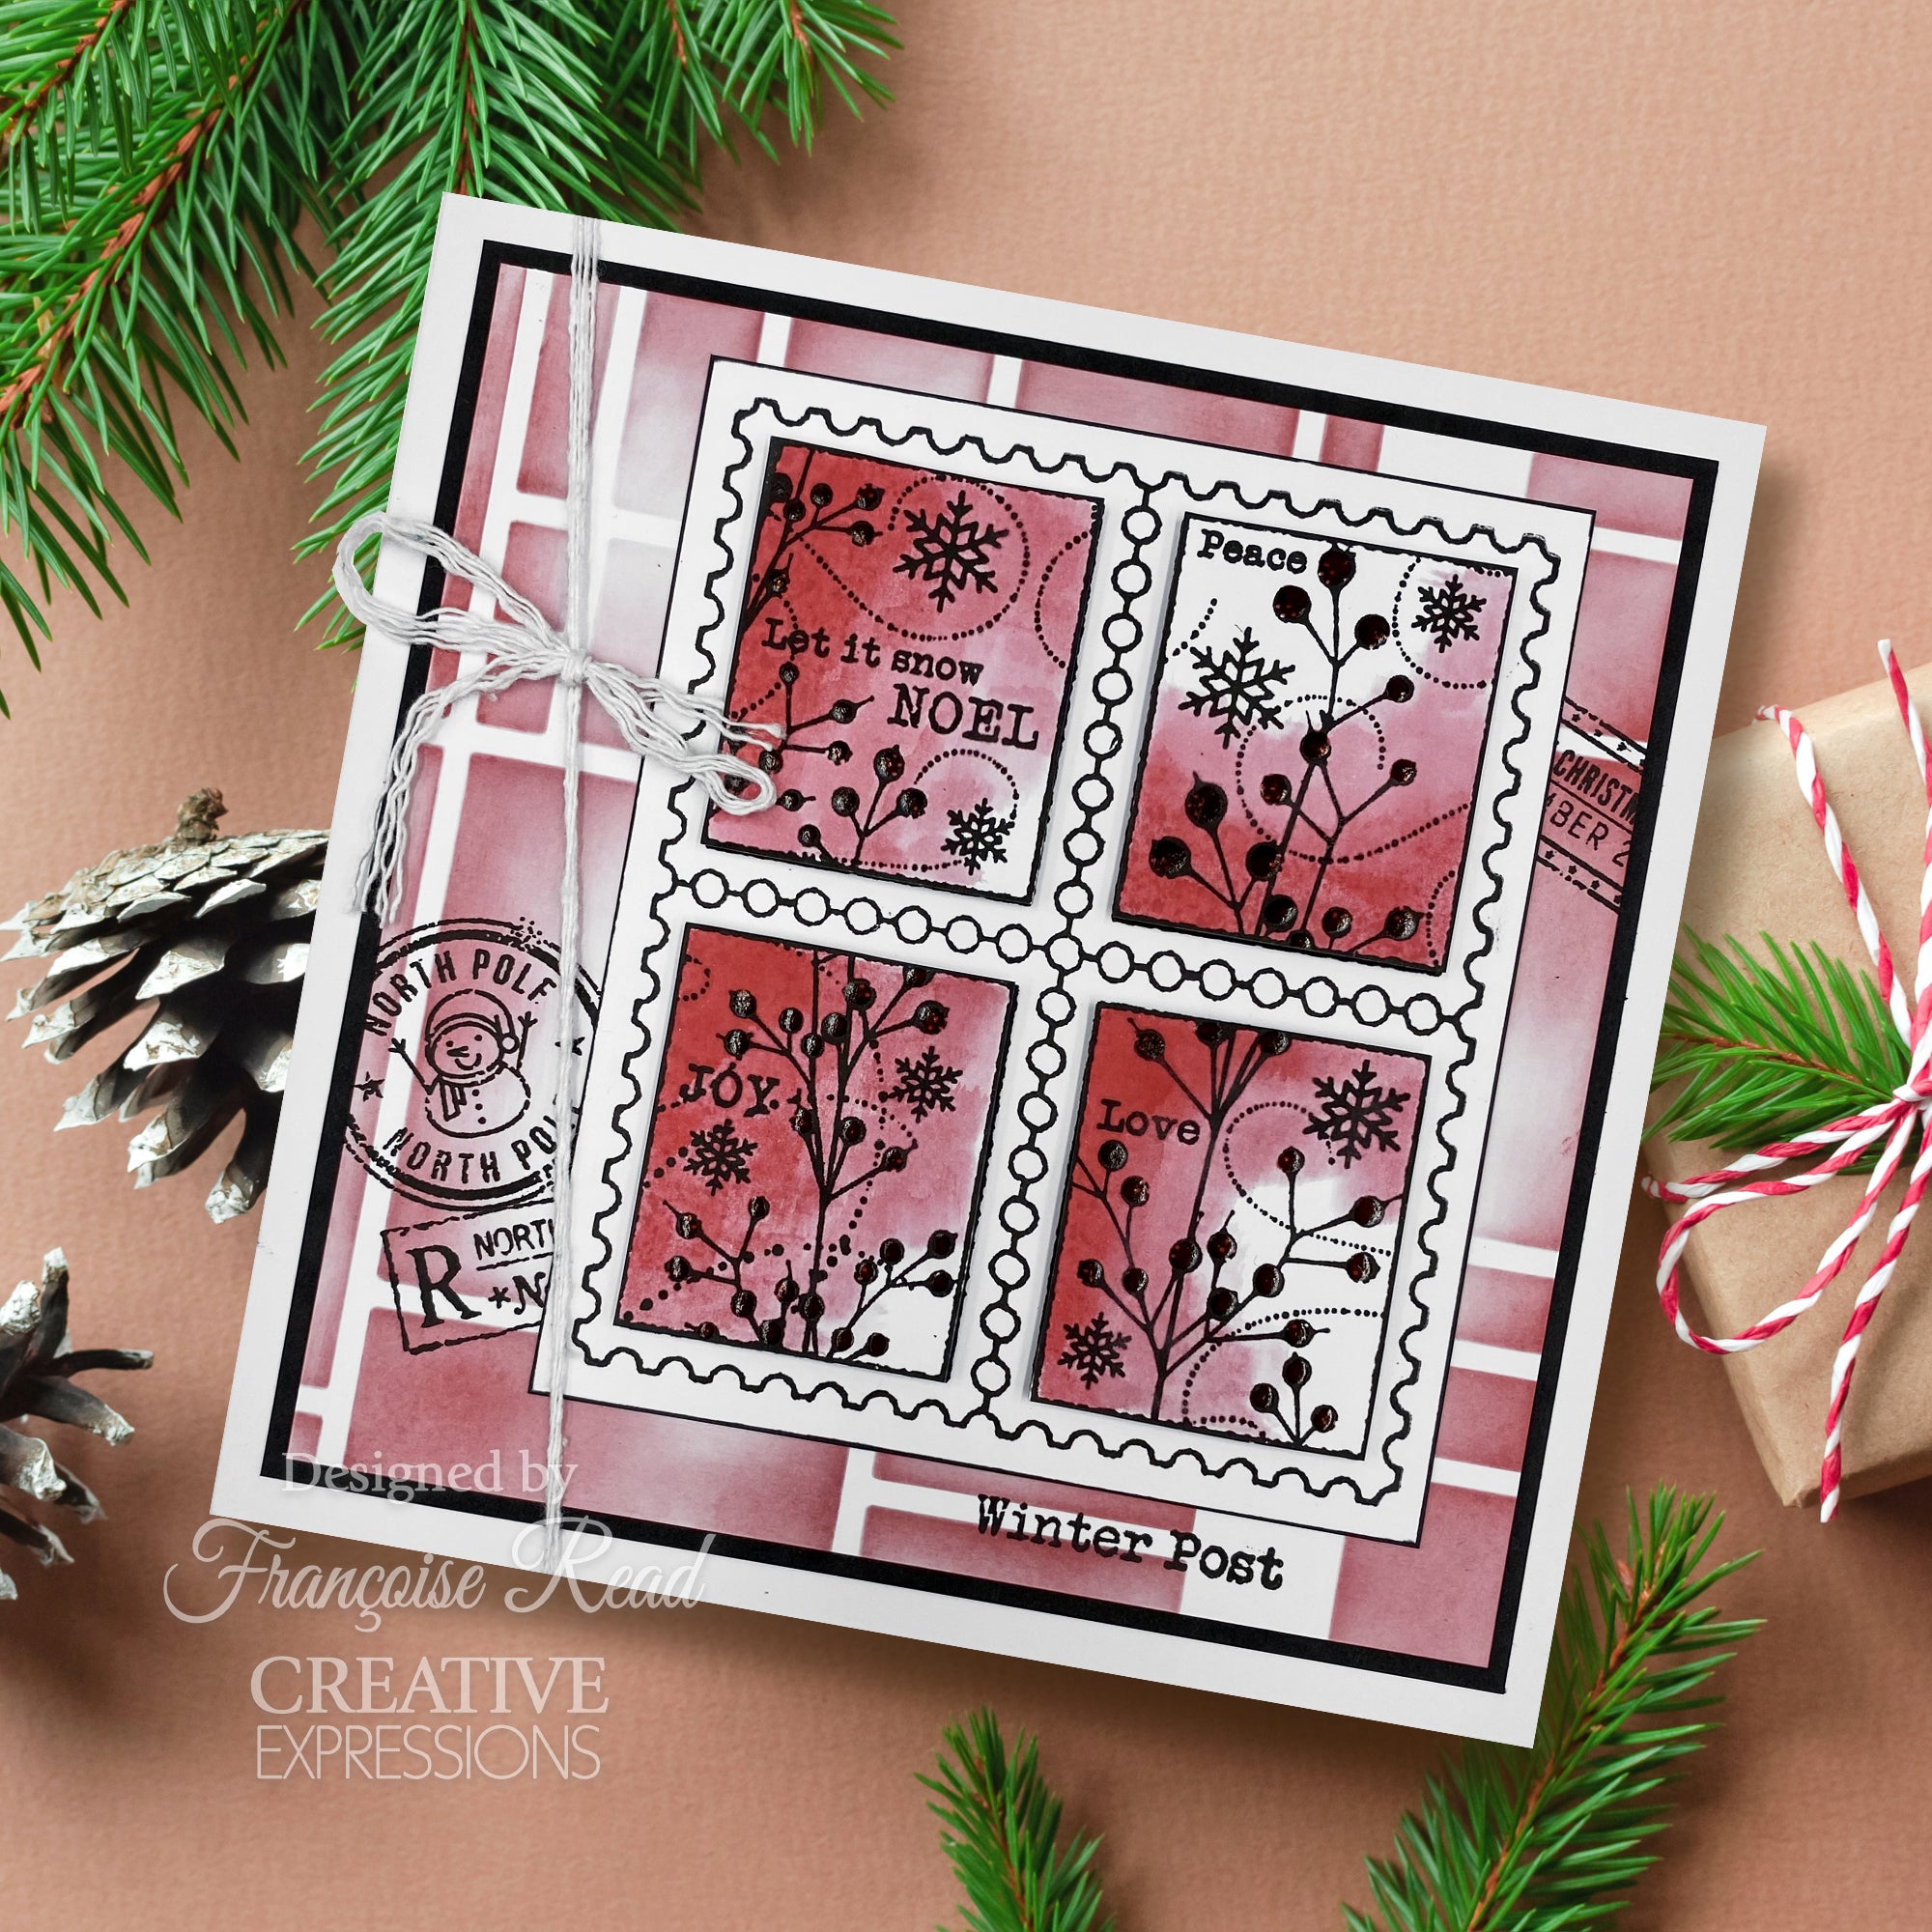 Woodware Clear Singles Christmas Postmarks 3 in x 4 in Stamp